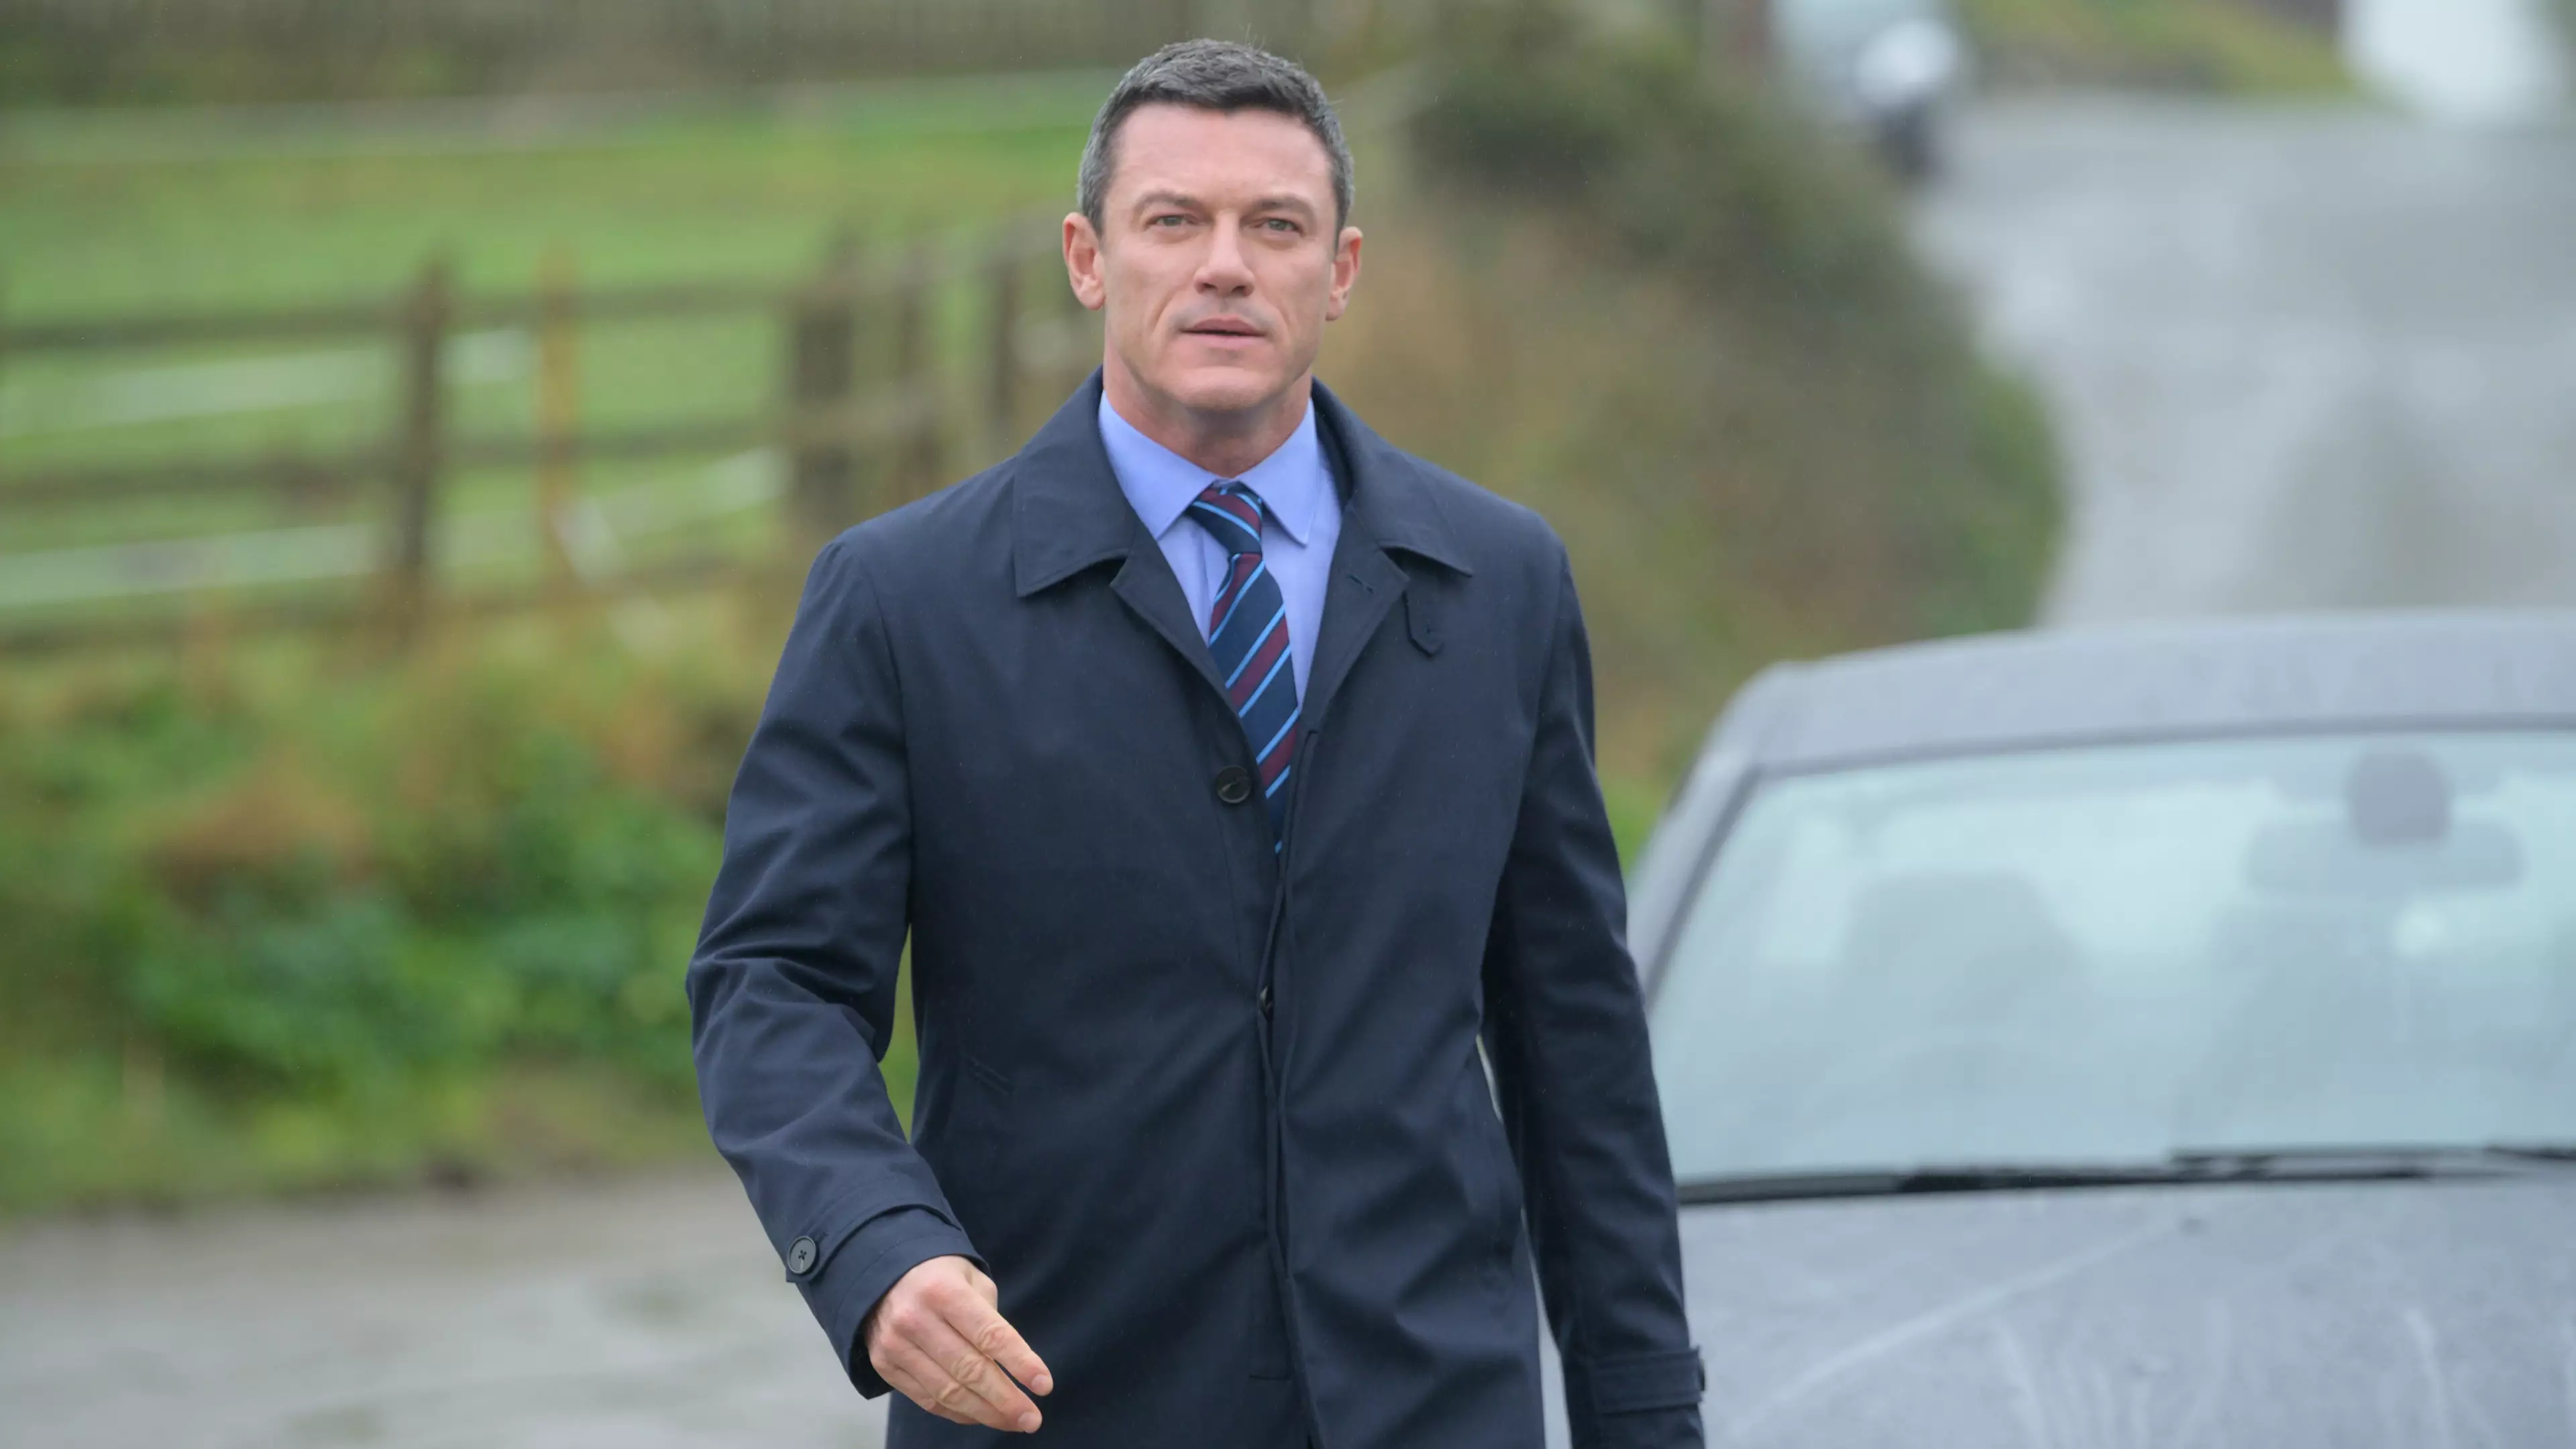 Luke Evans' Serial Killer Drama, The Pembrokeshire Murders, Is Coming To ITV On January 11th